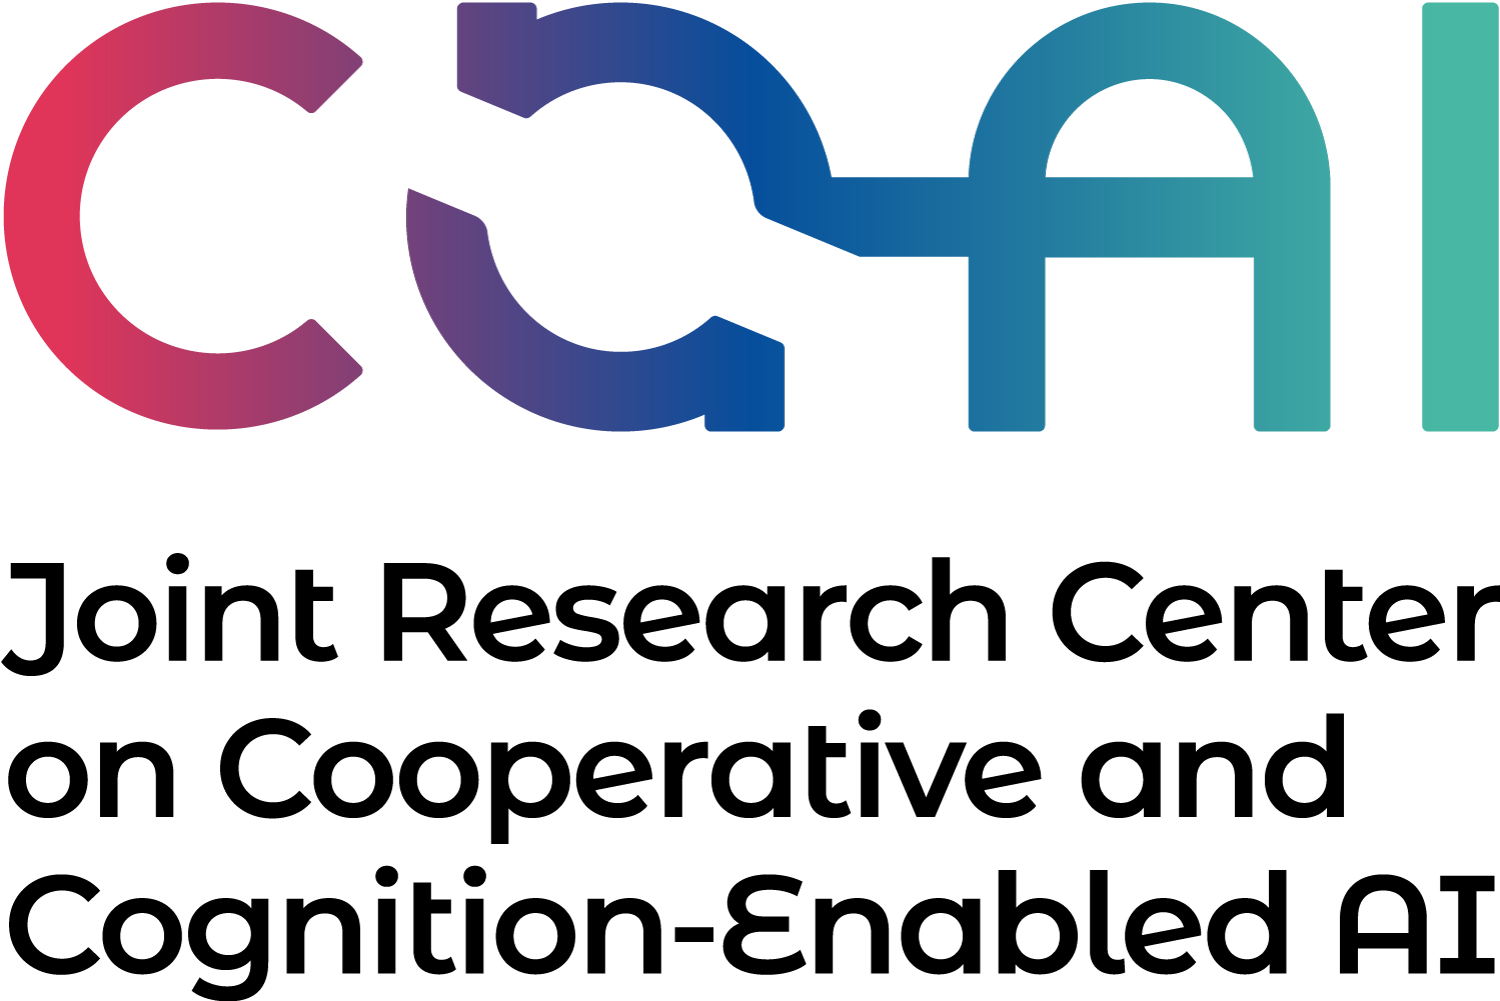 Logo of the CoAI Joint Research Center